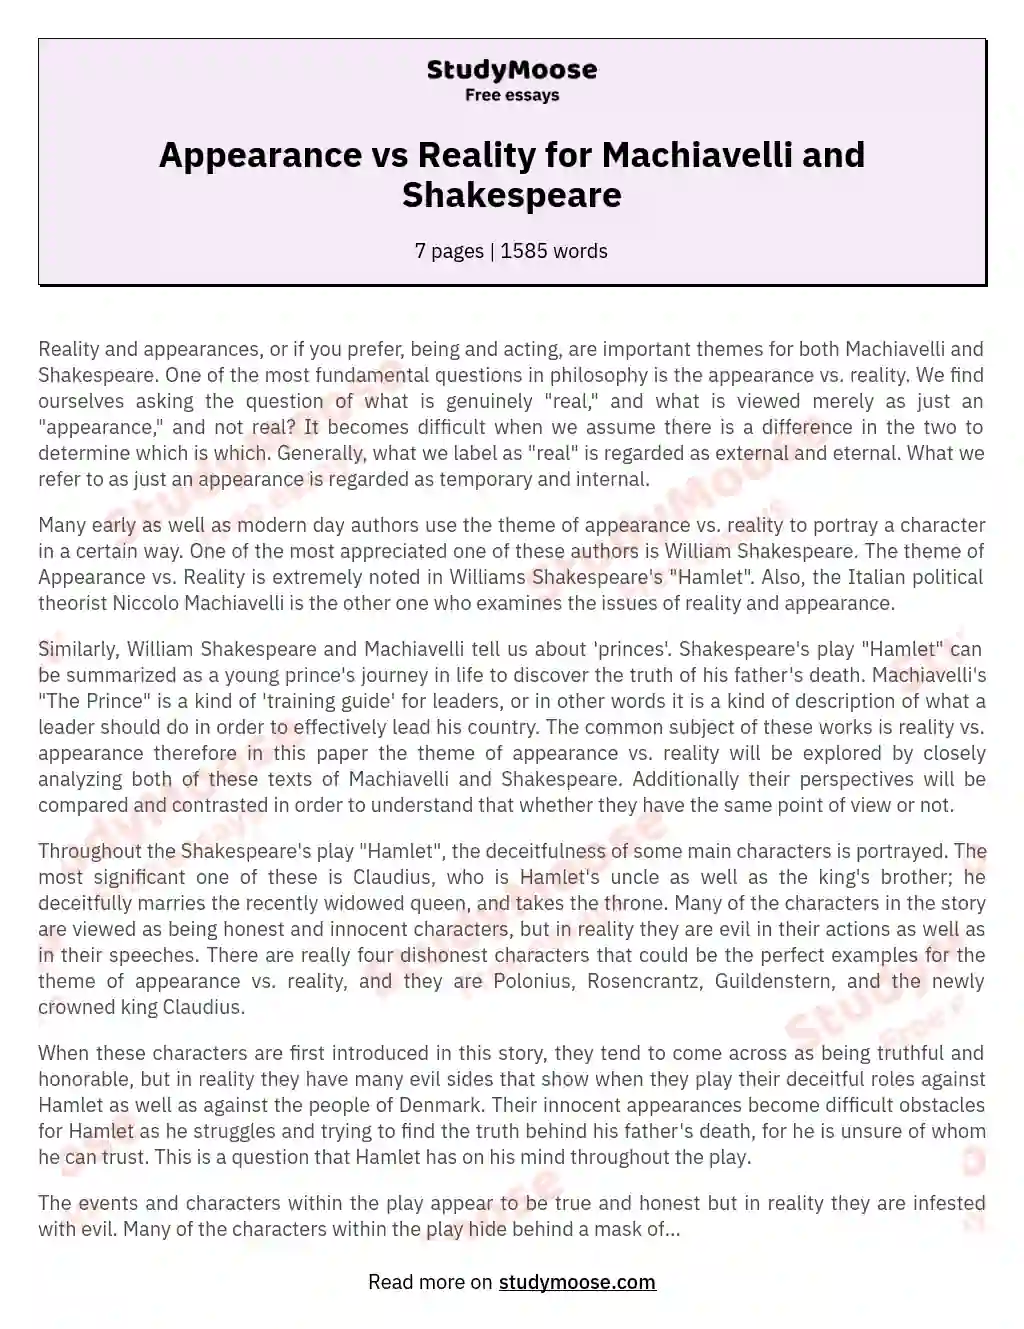 Appearance vs Reality for Machiavelli and Shakespeare